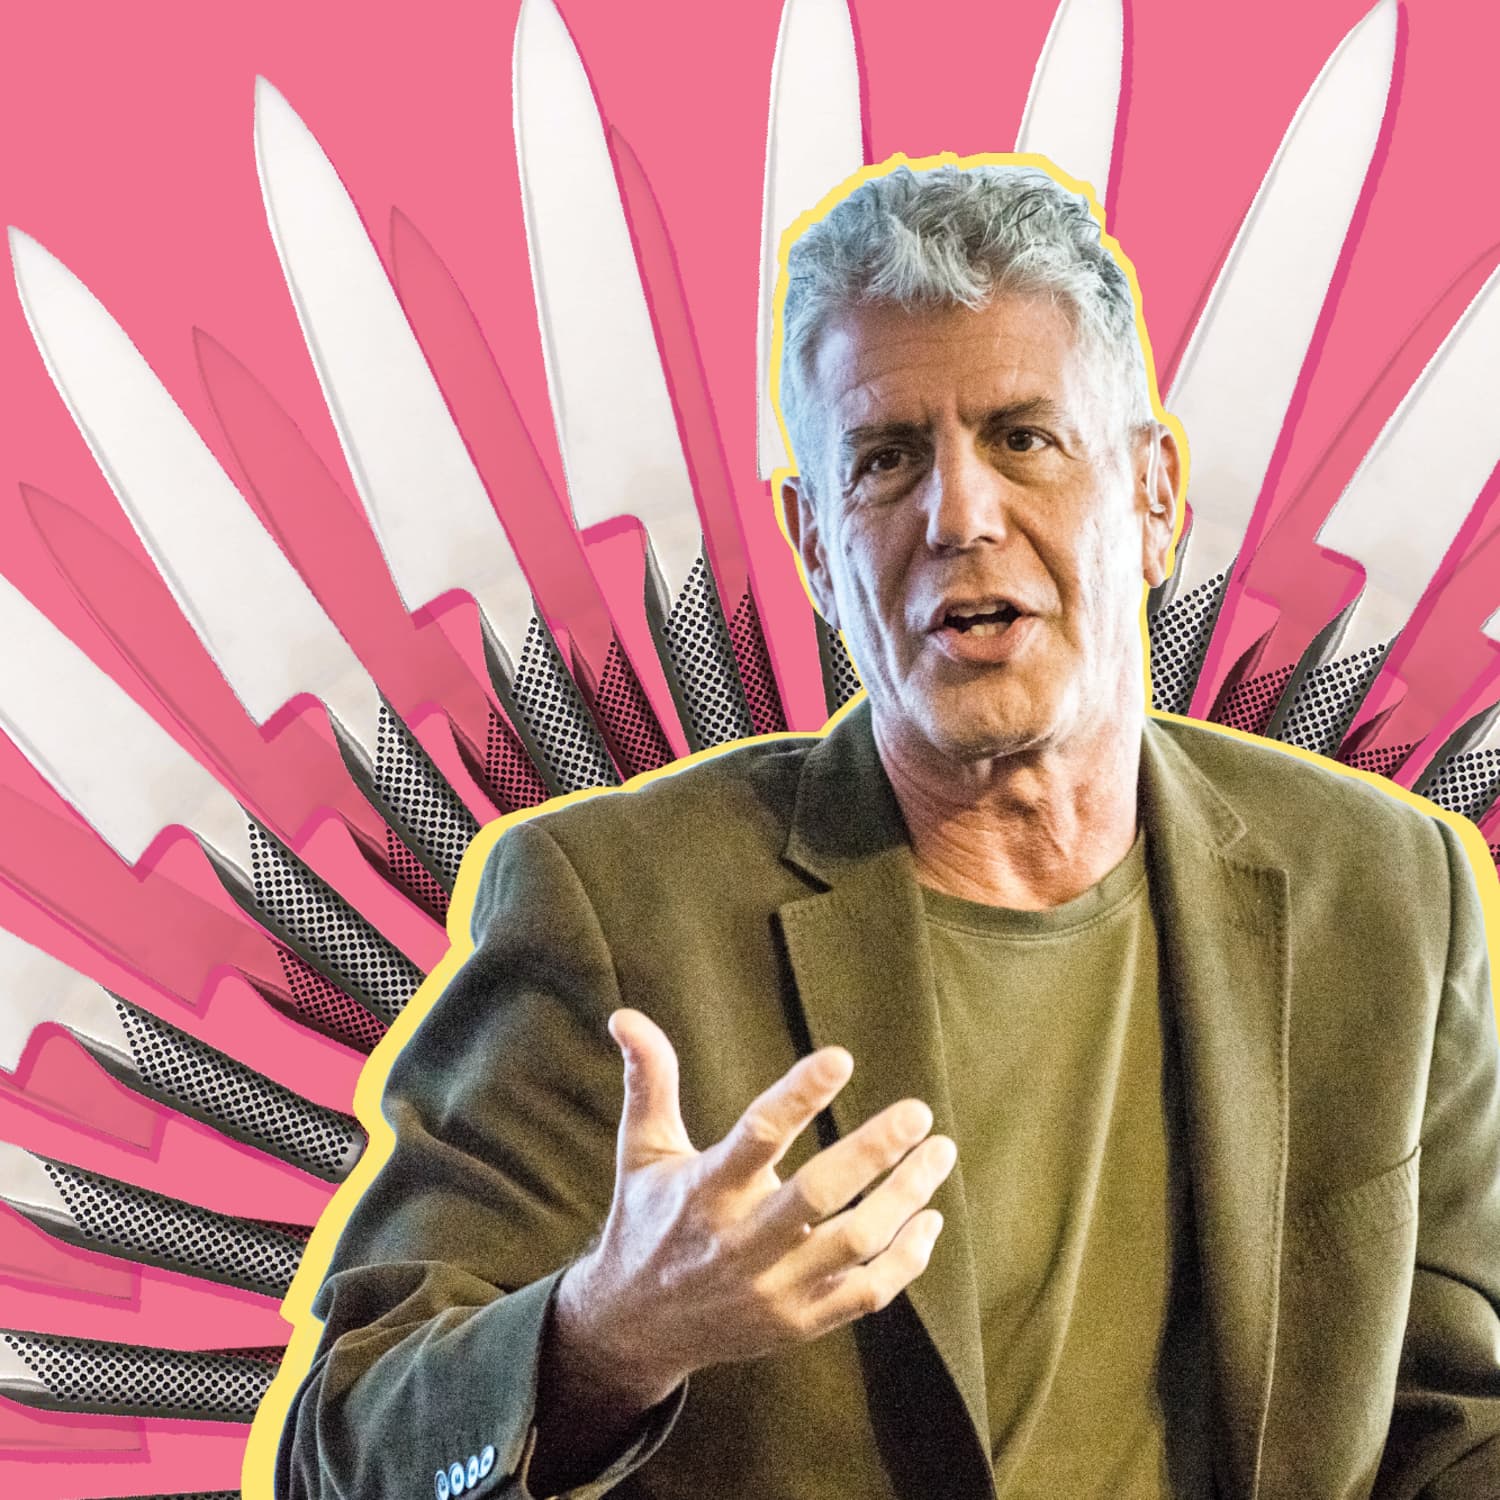 II. Early Life and Career of Anthony Bourdain